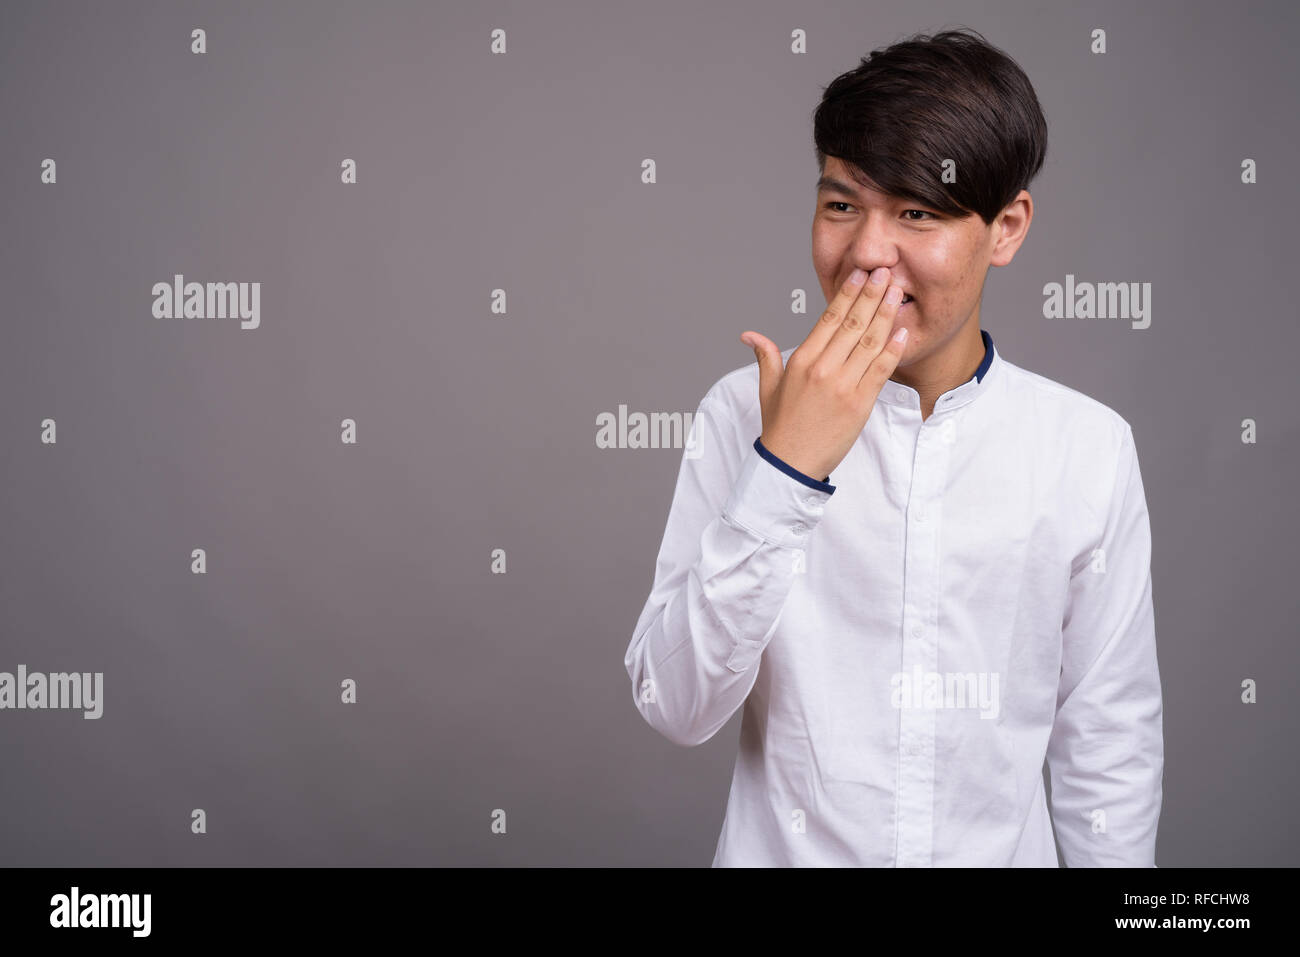 Young Asian teenage boy against gray background Stock Photo